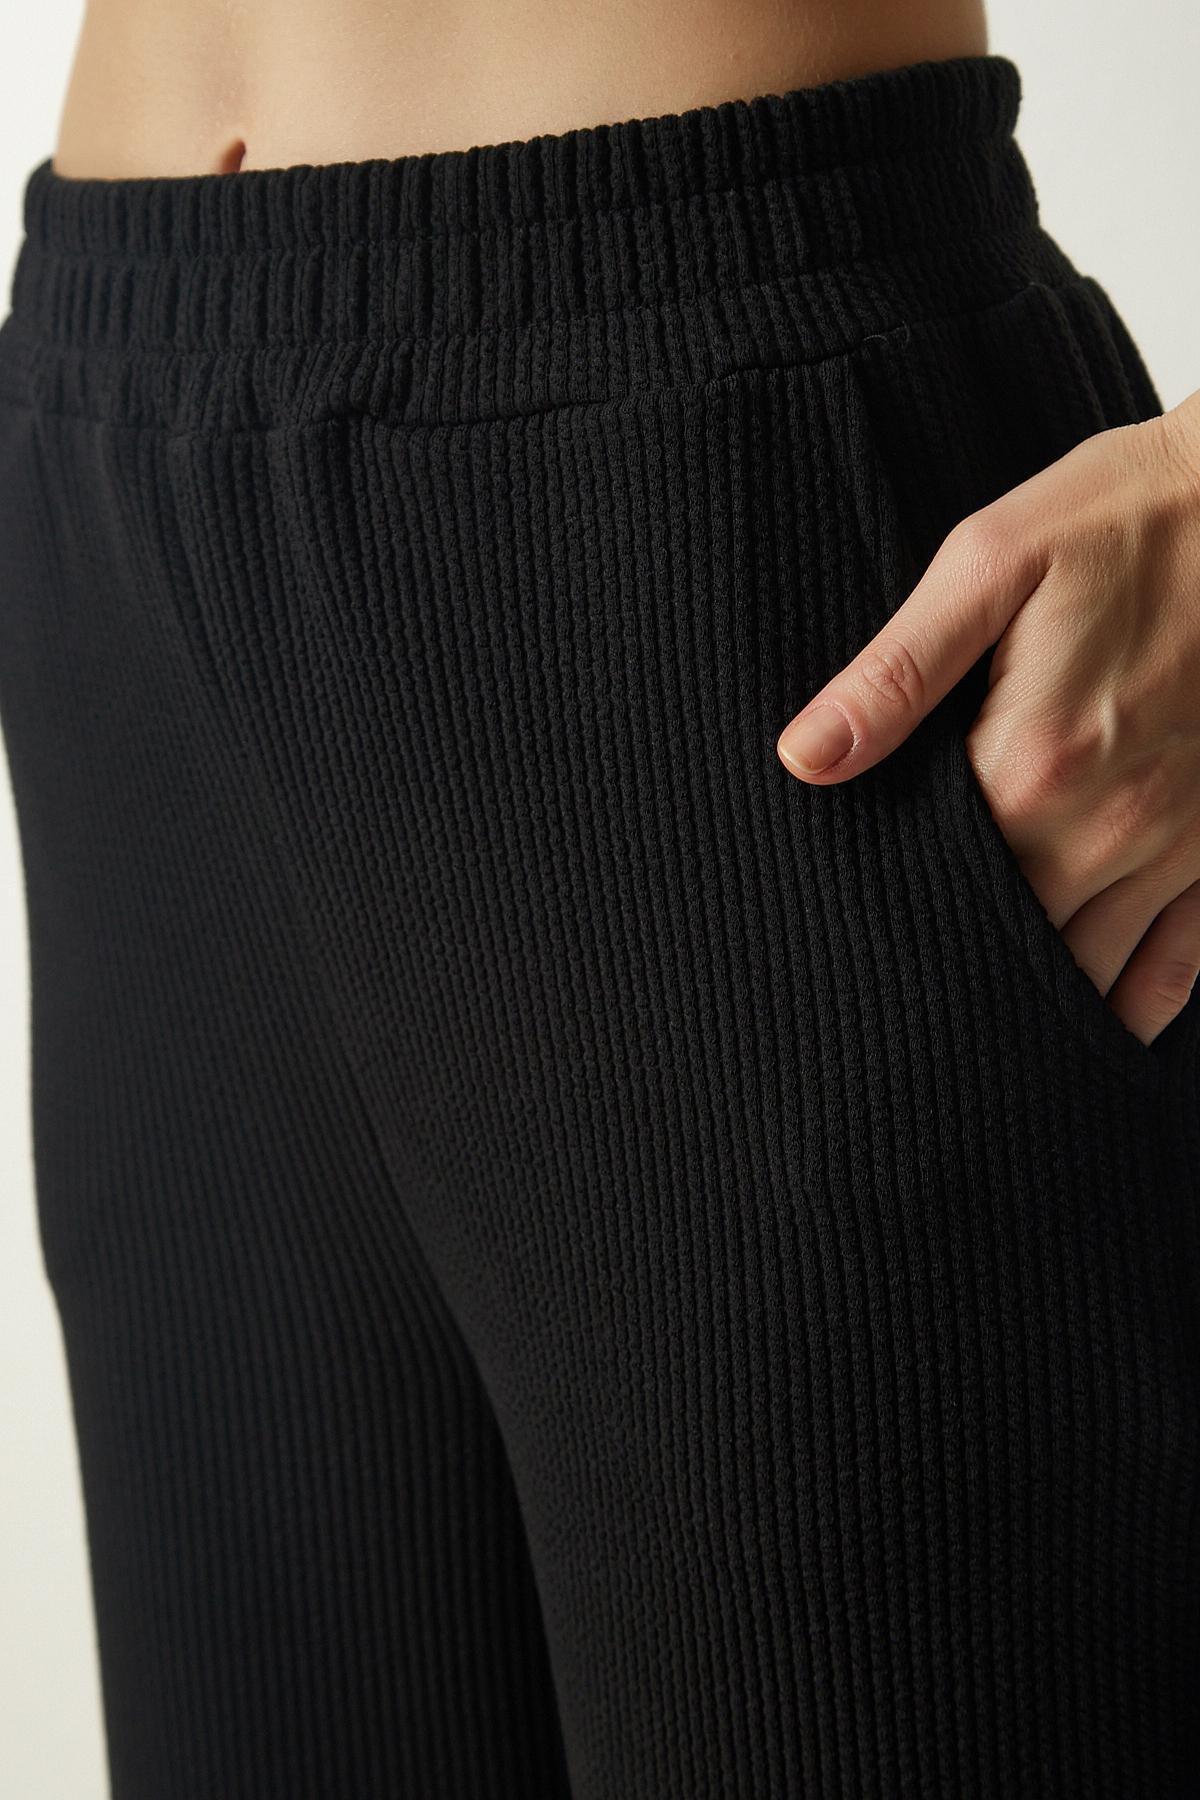 Happiness Istanbul - Black Ribbed Knitted Trousers